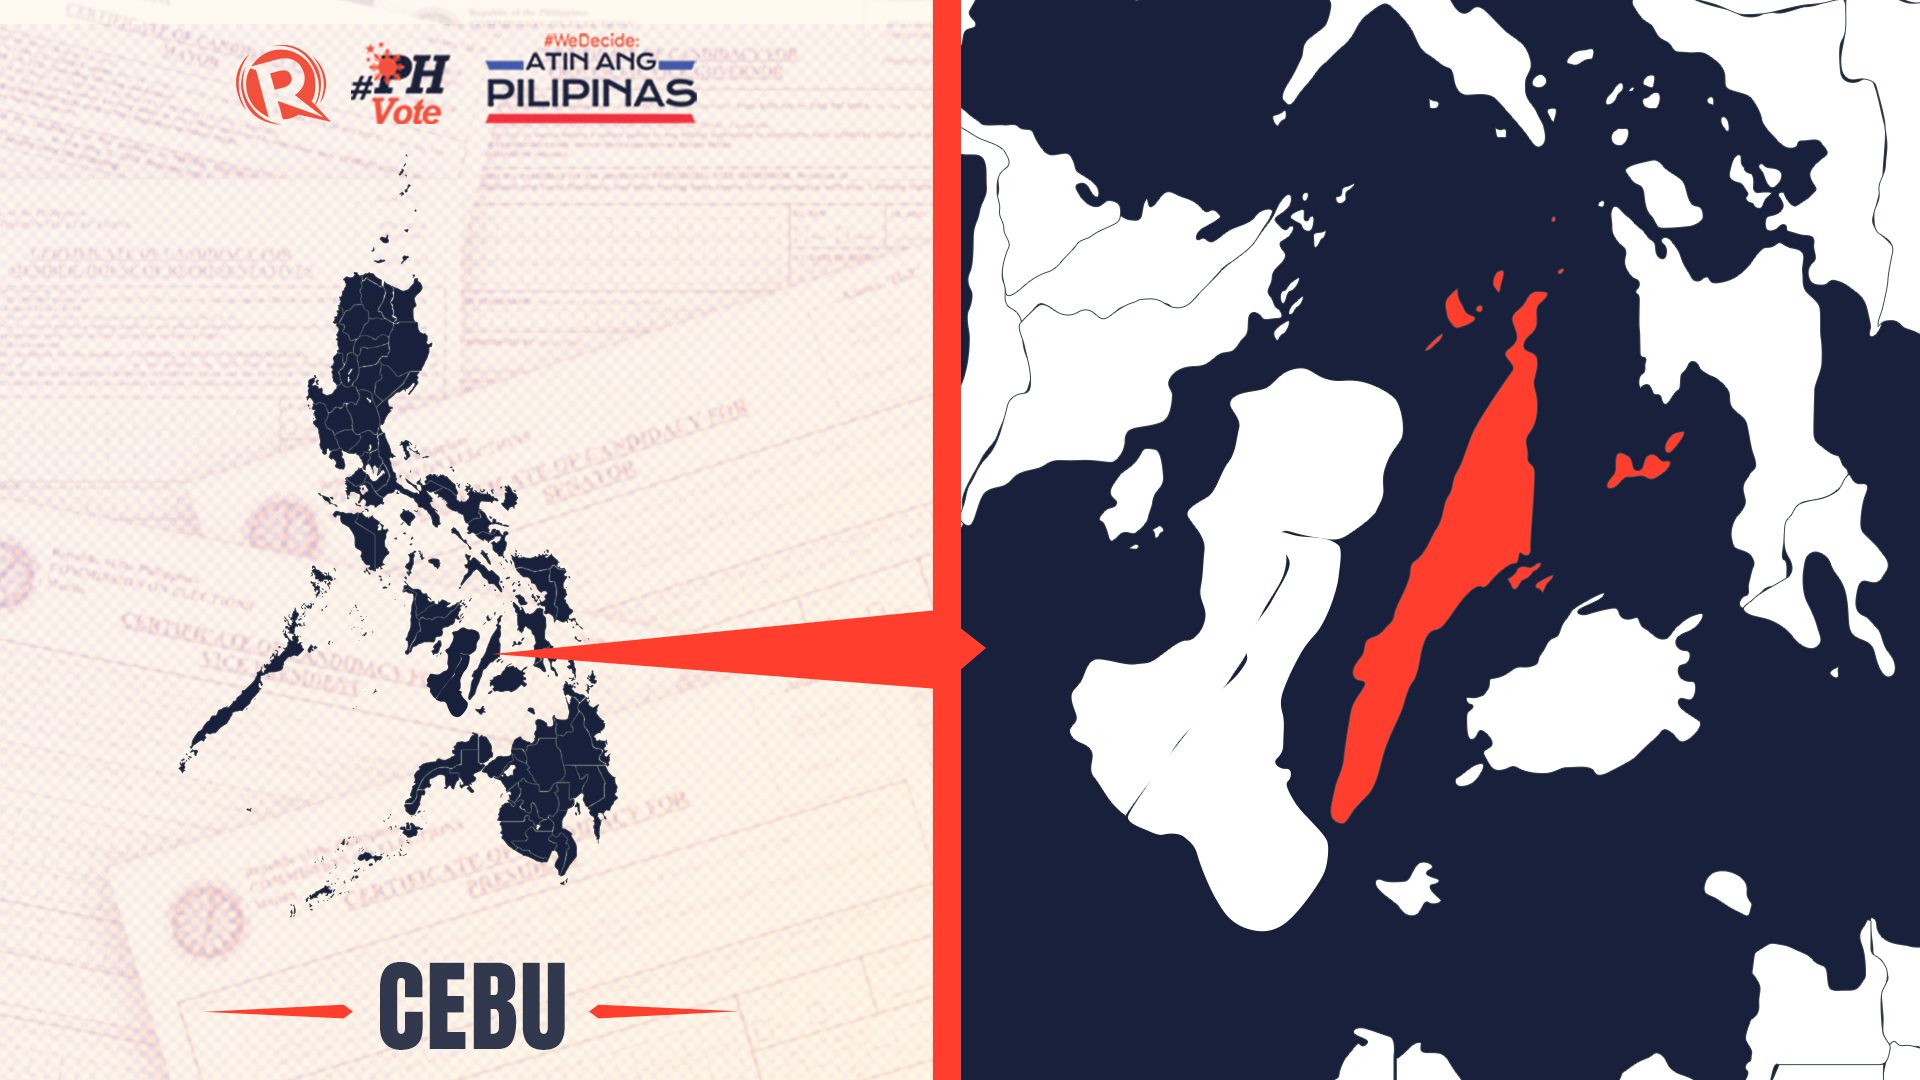 LIST: Who is running in Cebu in the 2022 Philippine elections?